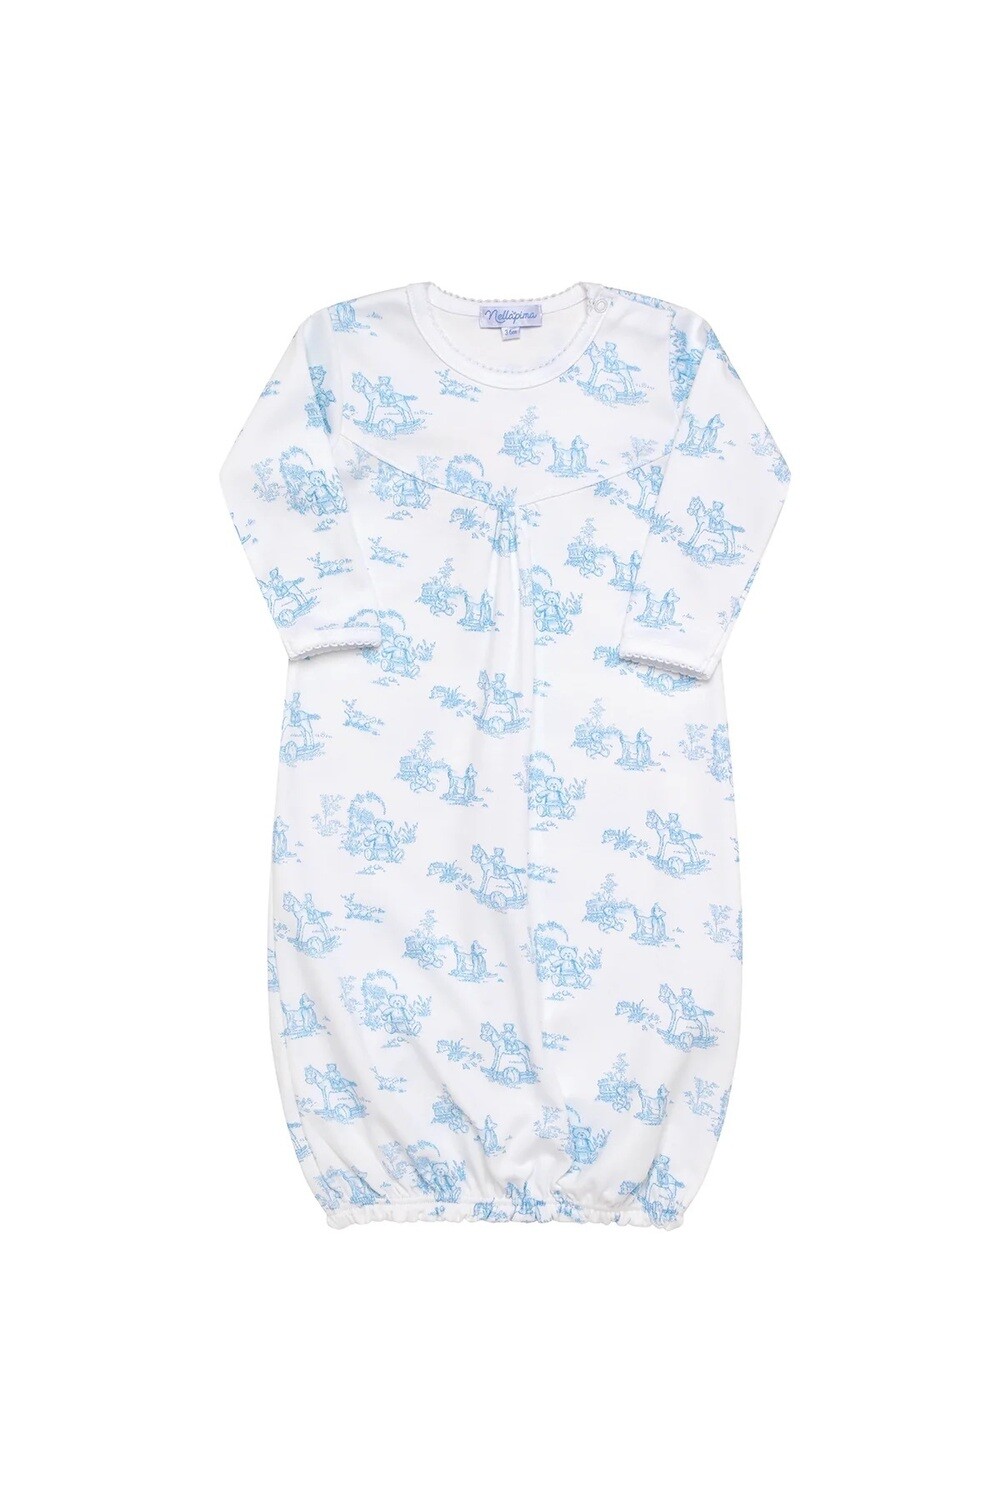 Blue Toile Baby Gown, Size: 0-3M